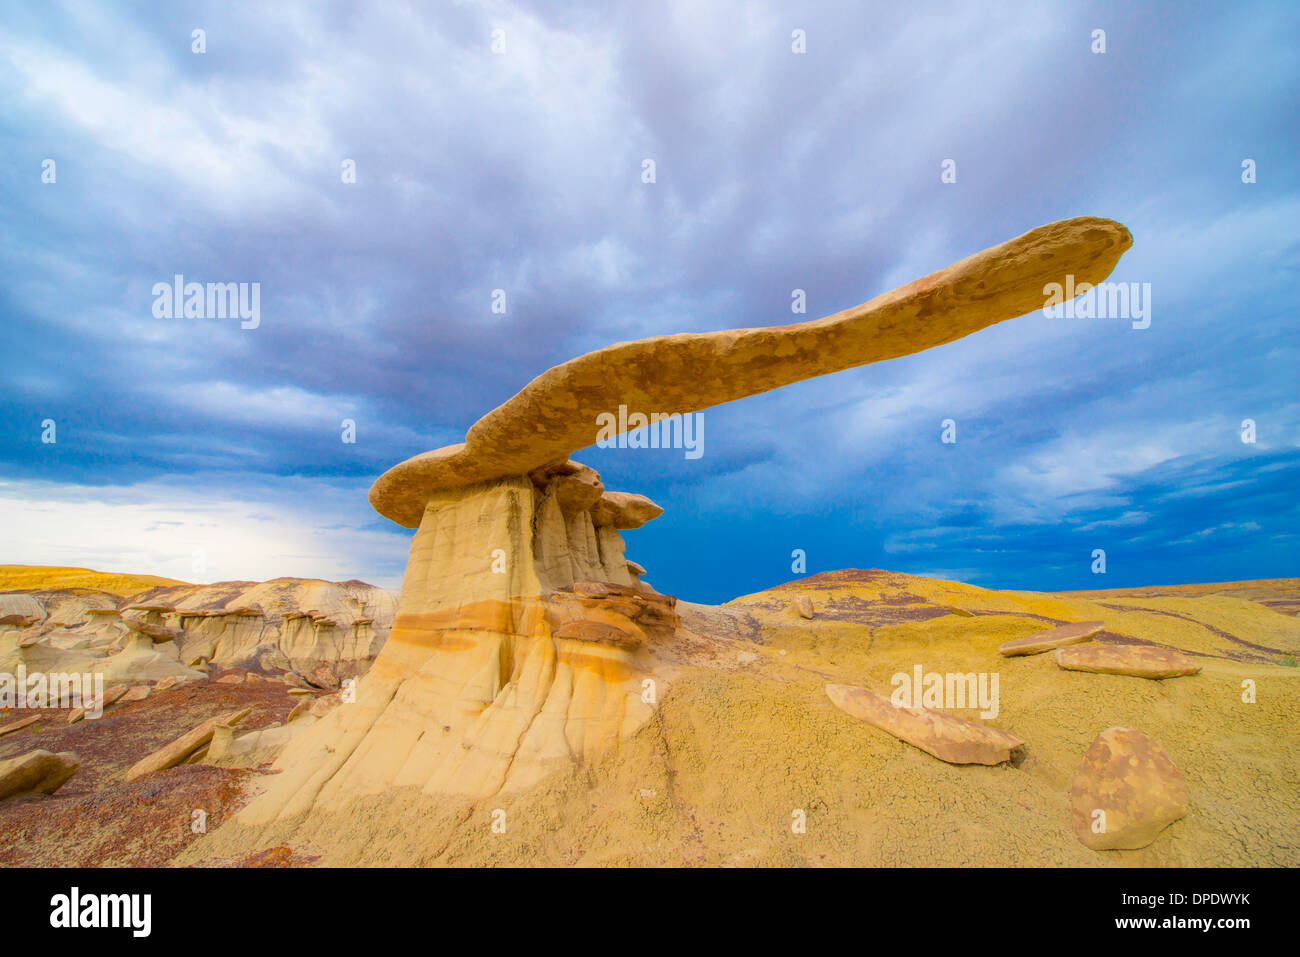 Balanced rock tongue in BLM wilderness New Mexico Stock Photo